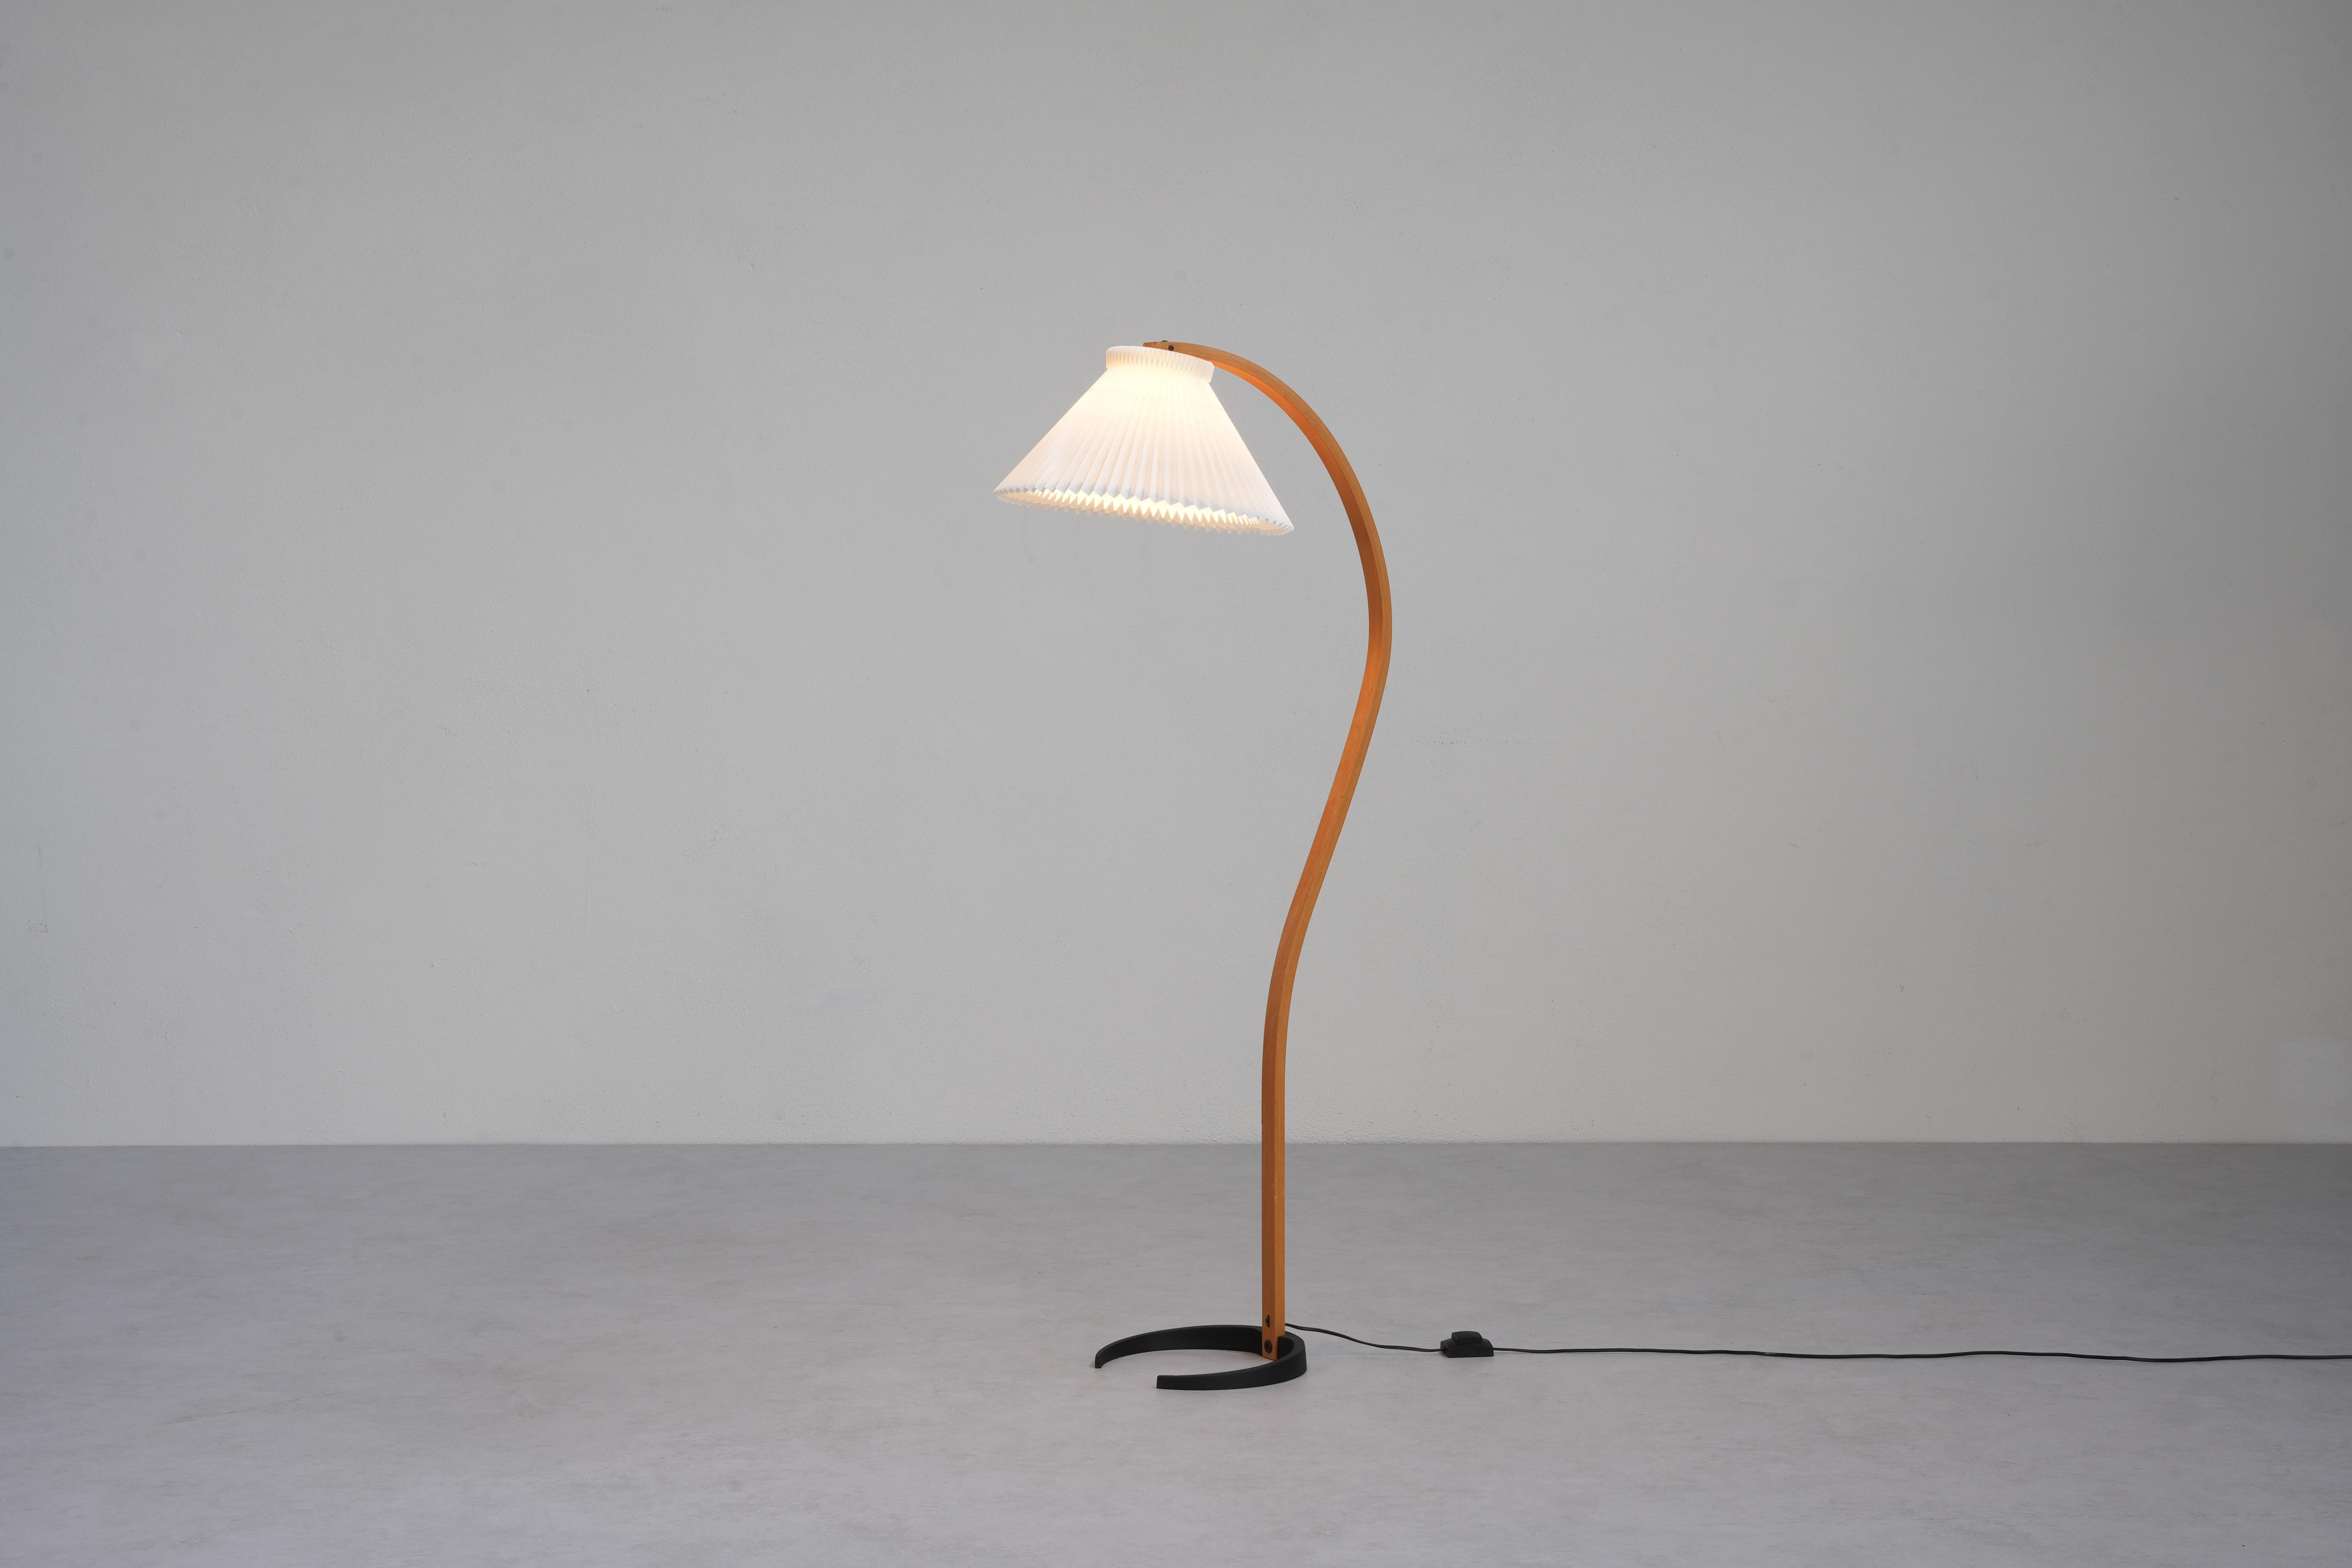 Beautiful floor lamp by Mads Caprani, 1970ies:
 
Crafted by Danish designer Mads Caprani, it elegantly merges form and function. From the innovative 1970s era, the lamp showcases Caprani's mastery of materials and form.
Organic curves and clean